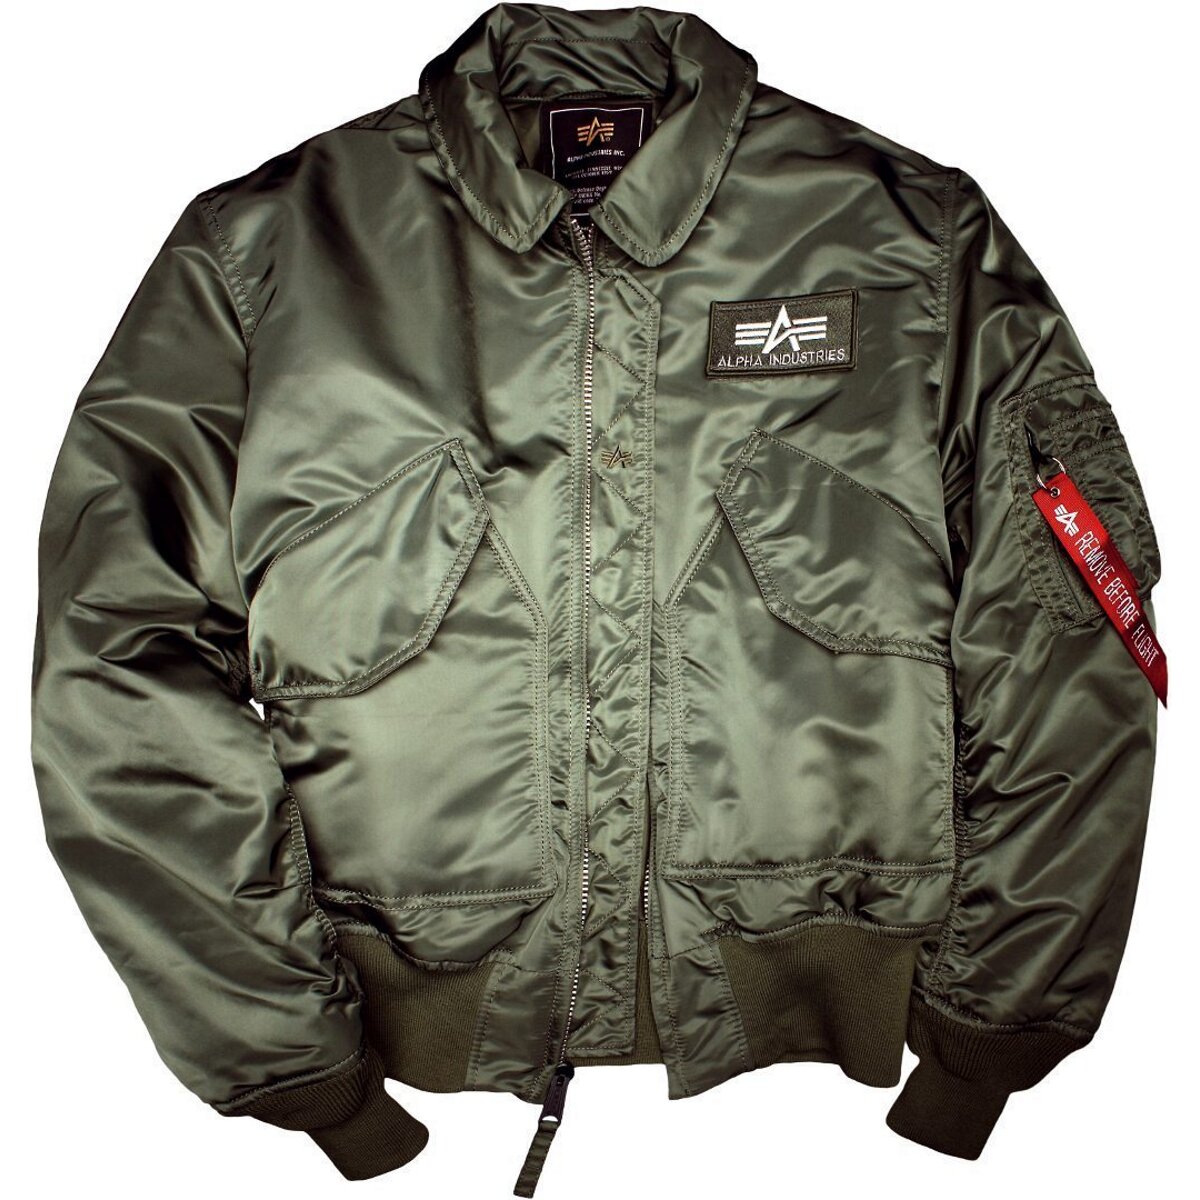 Alpha Industries Bomber Jacket CWU sage green - now at Wild-